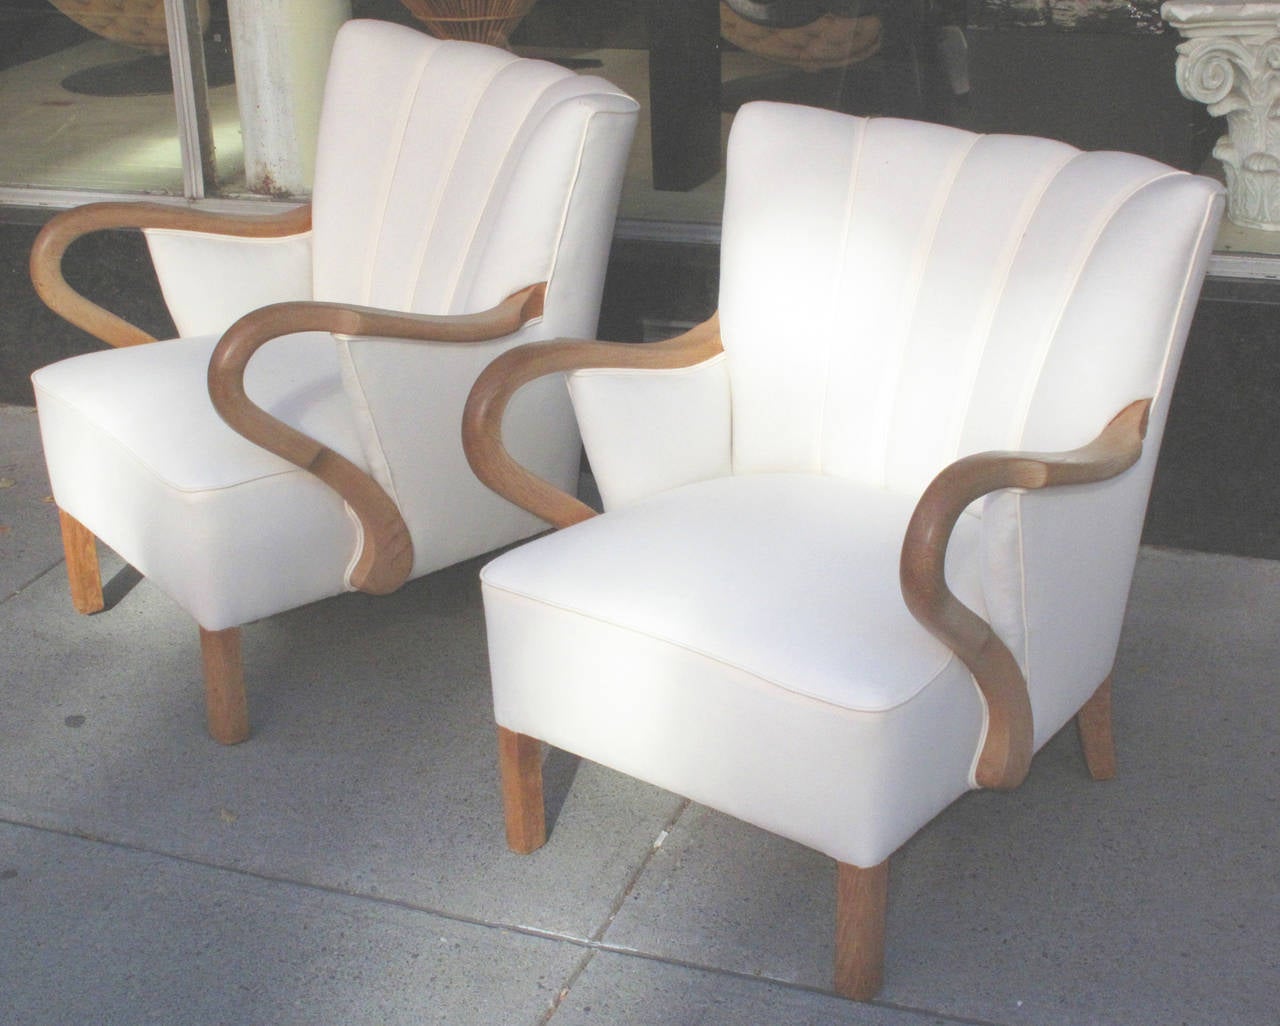 Pair of large Danish 1940s oak frame armchairs with channeled backs and exaggerated curved open arms.